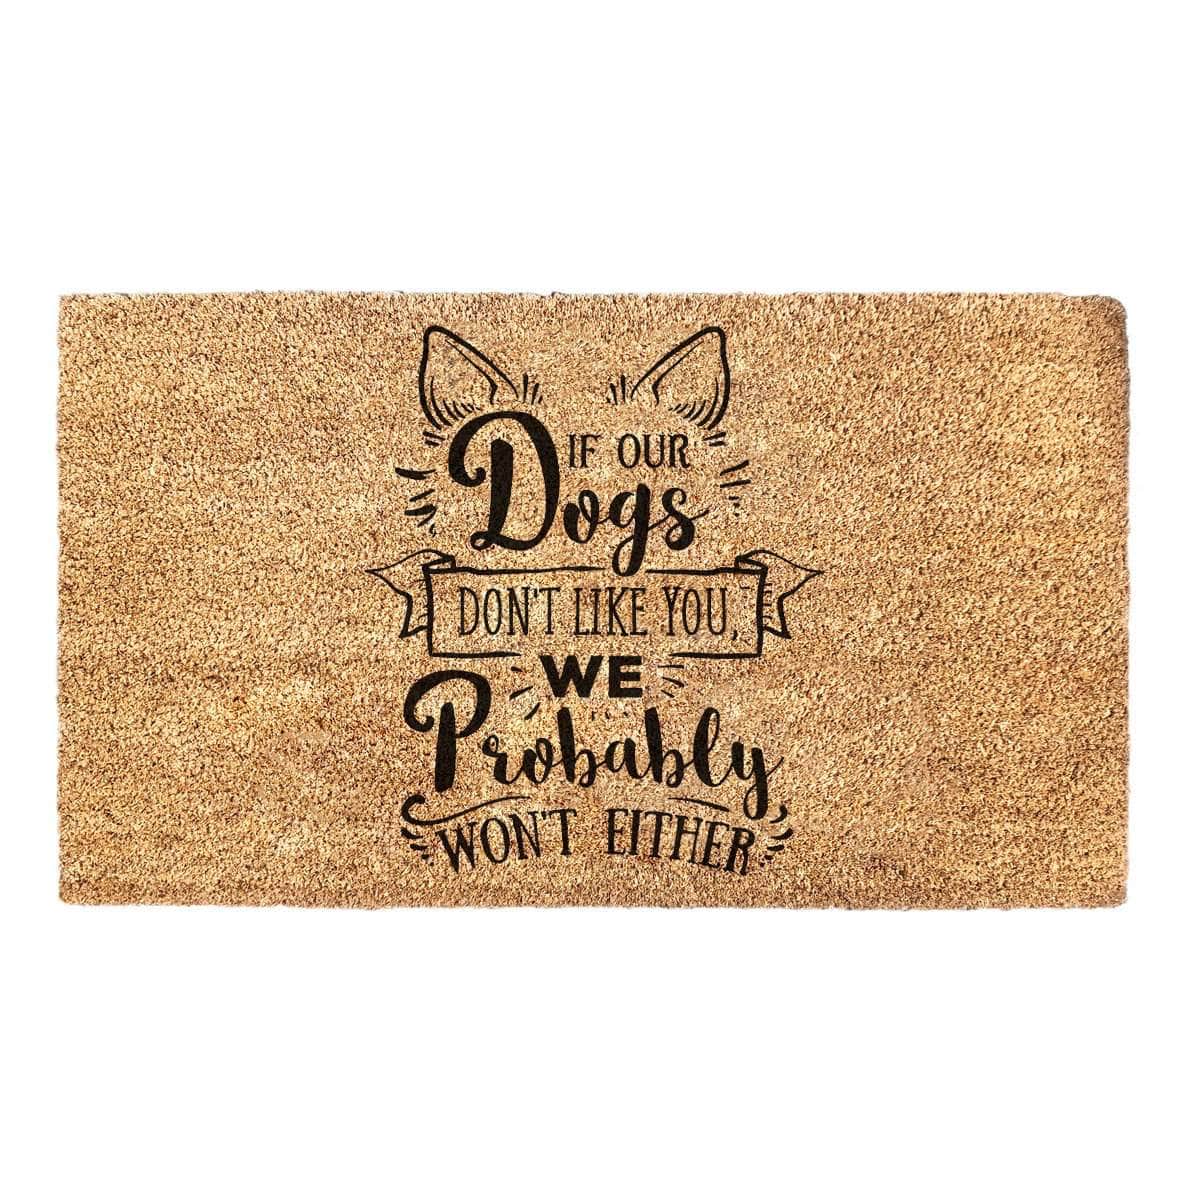 If Our Dog Doesn't Like You - Doormat